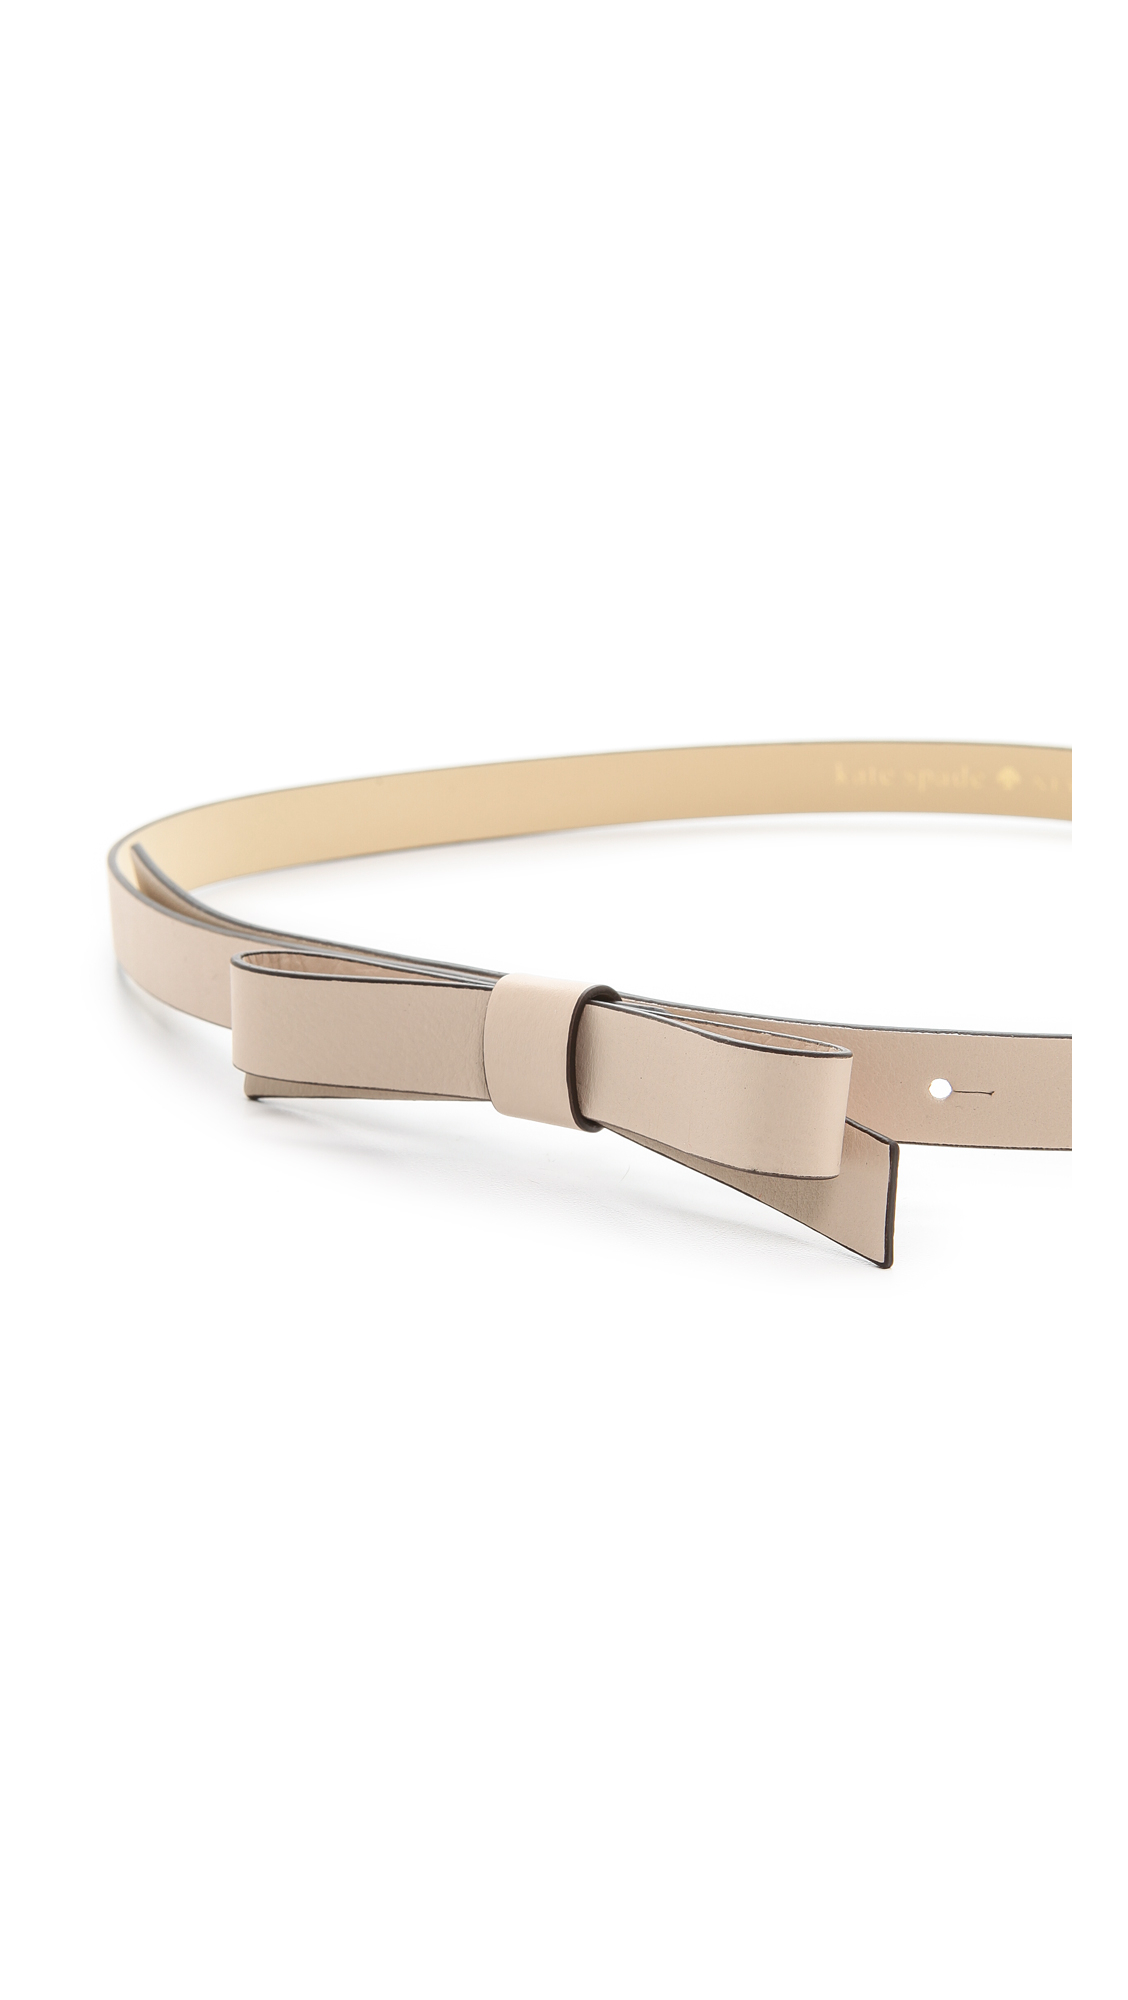 Kate spade new york Skinny Bow Belt - Dynasty Red in Natural | Lyst